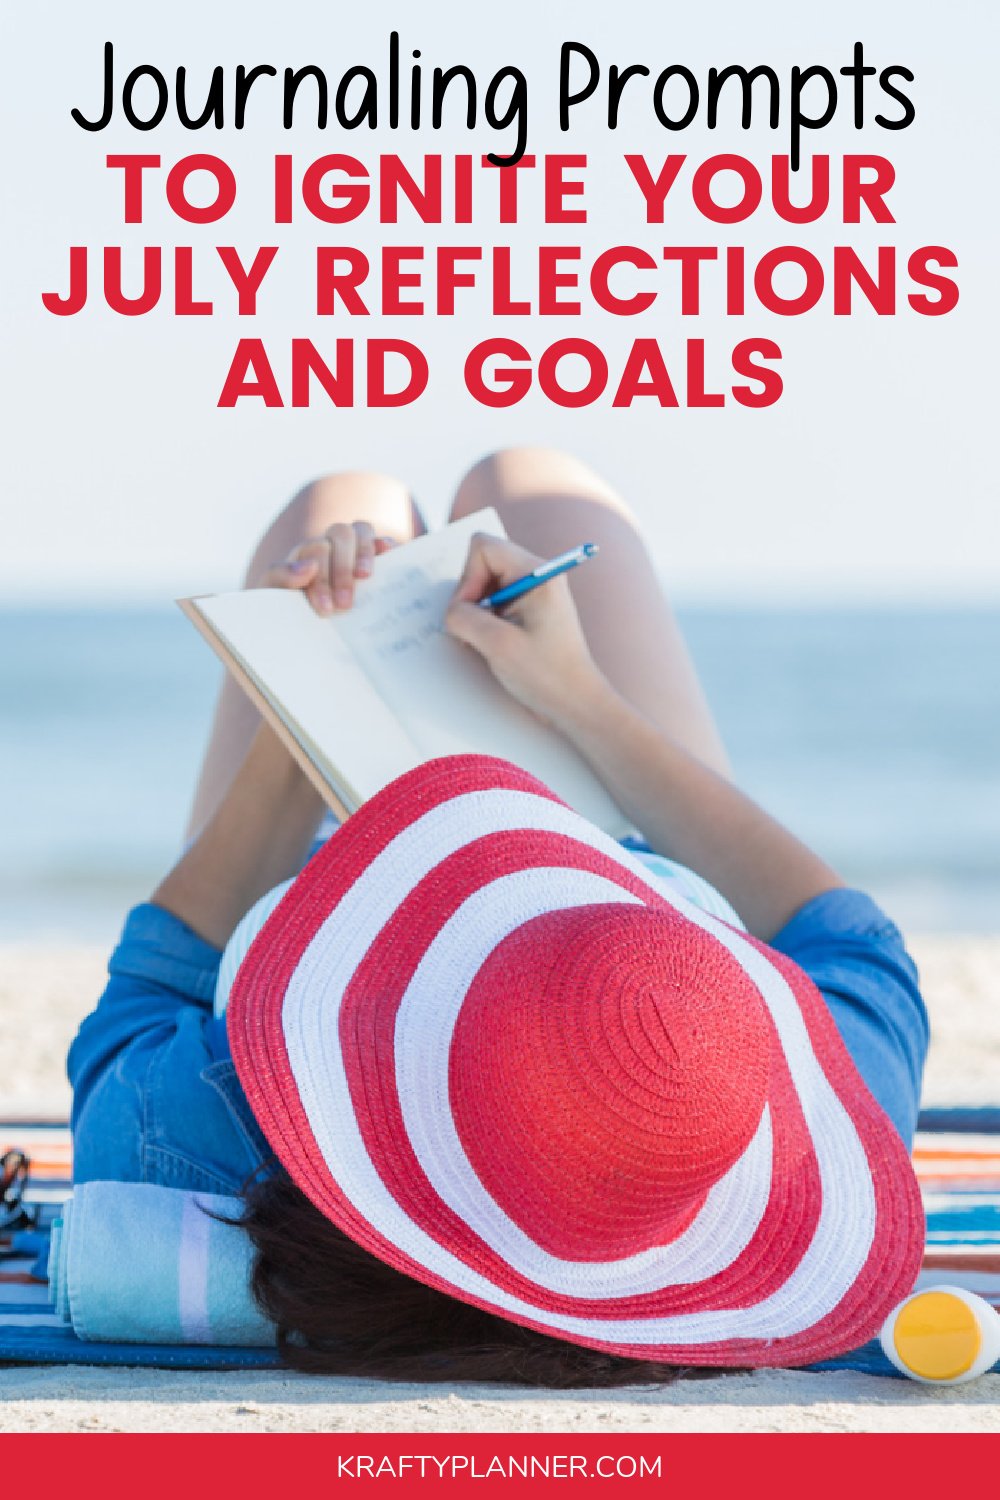 Journaling Prompts to Ignite Your July Reflections and Goals (1).jpg